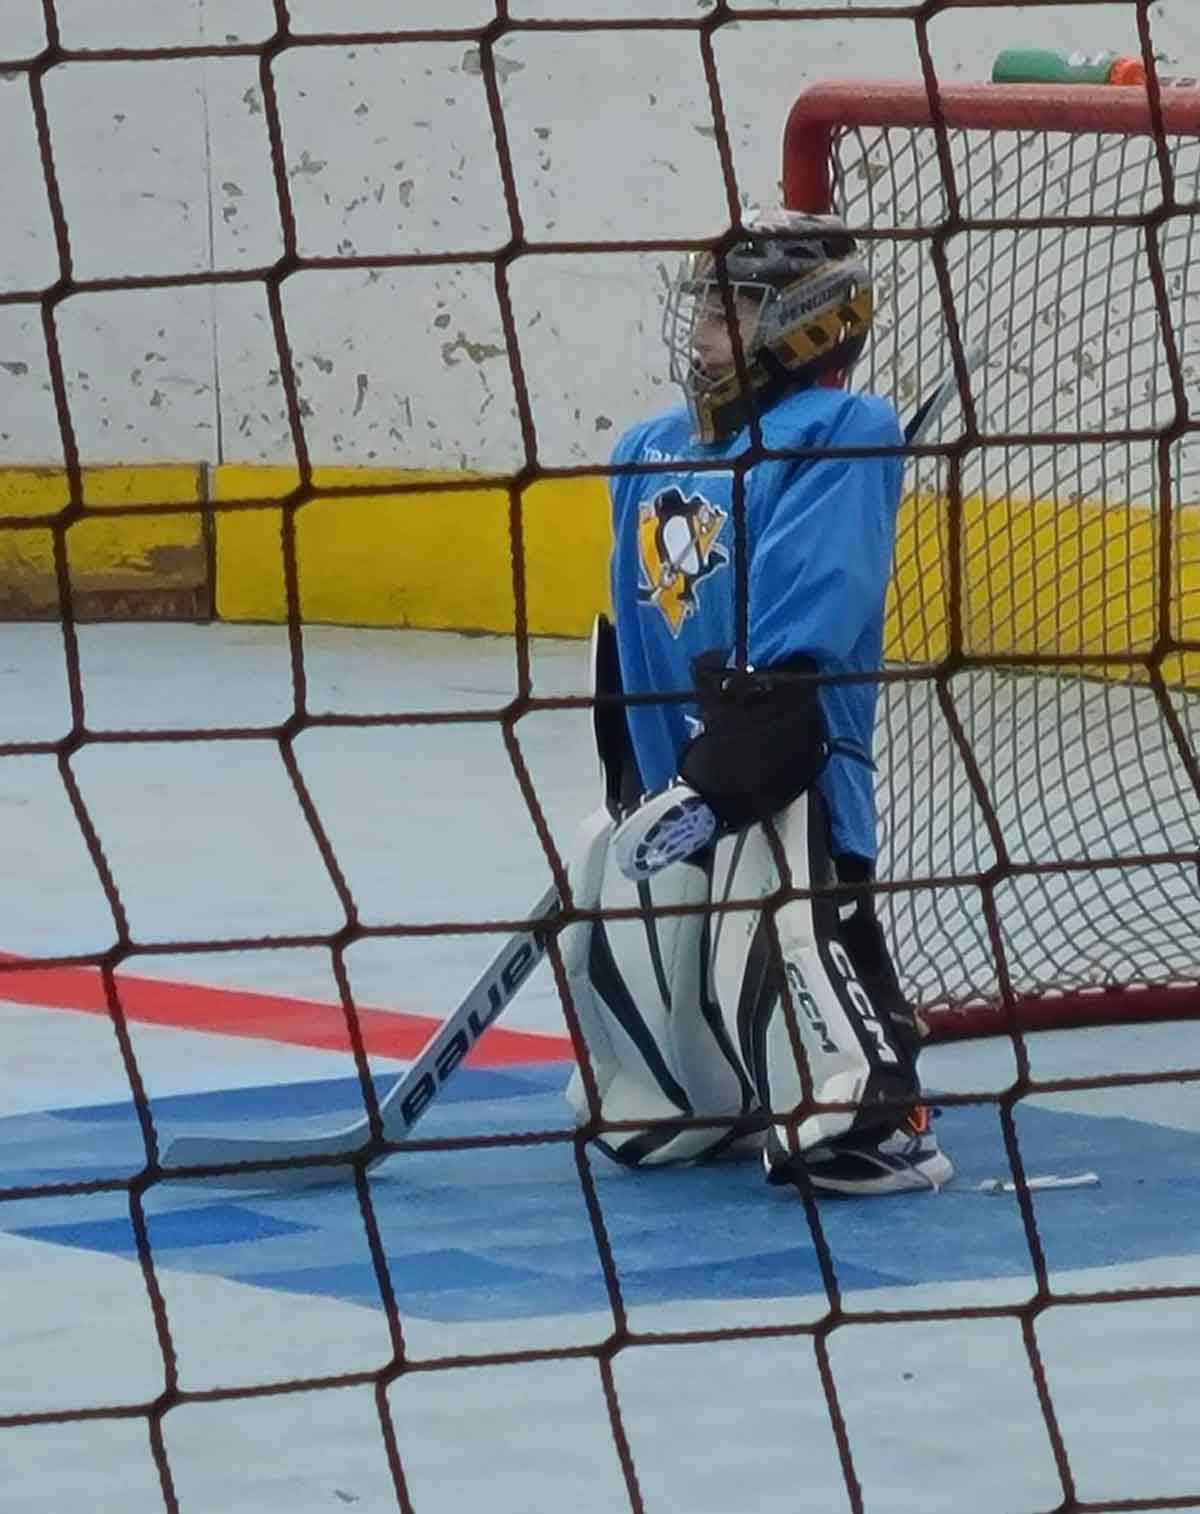 Little boy in a blue jersey and goalie equipment standing in front of a hockey net on a dek surface.